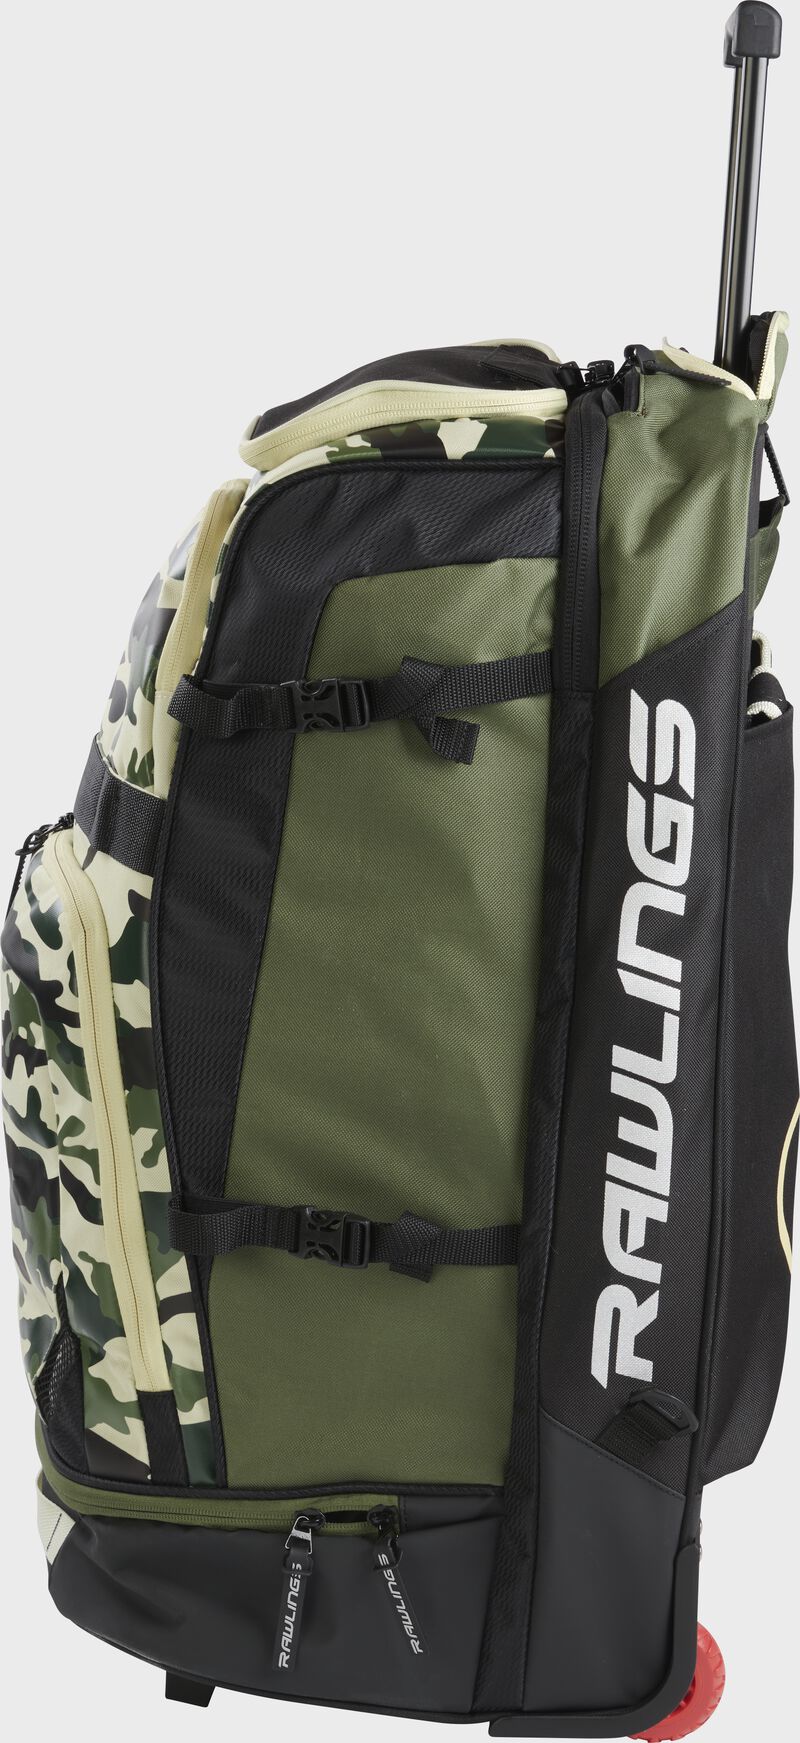 Right-side view of camo Rawlings Wheeled Catcher's Backpack - SKU: R1801